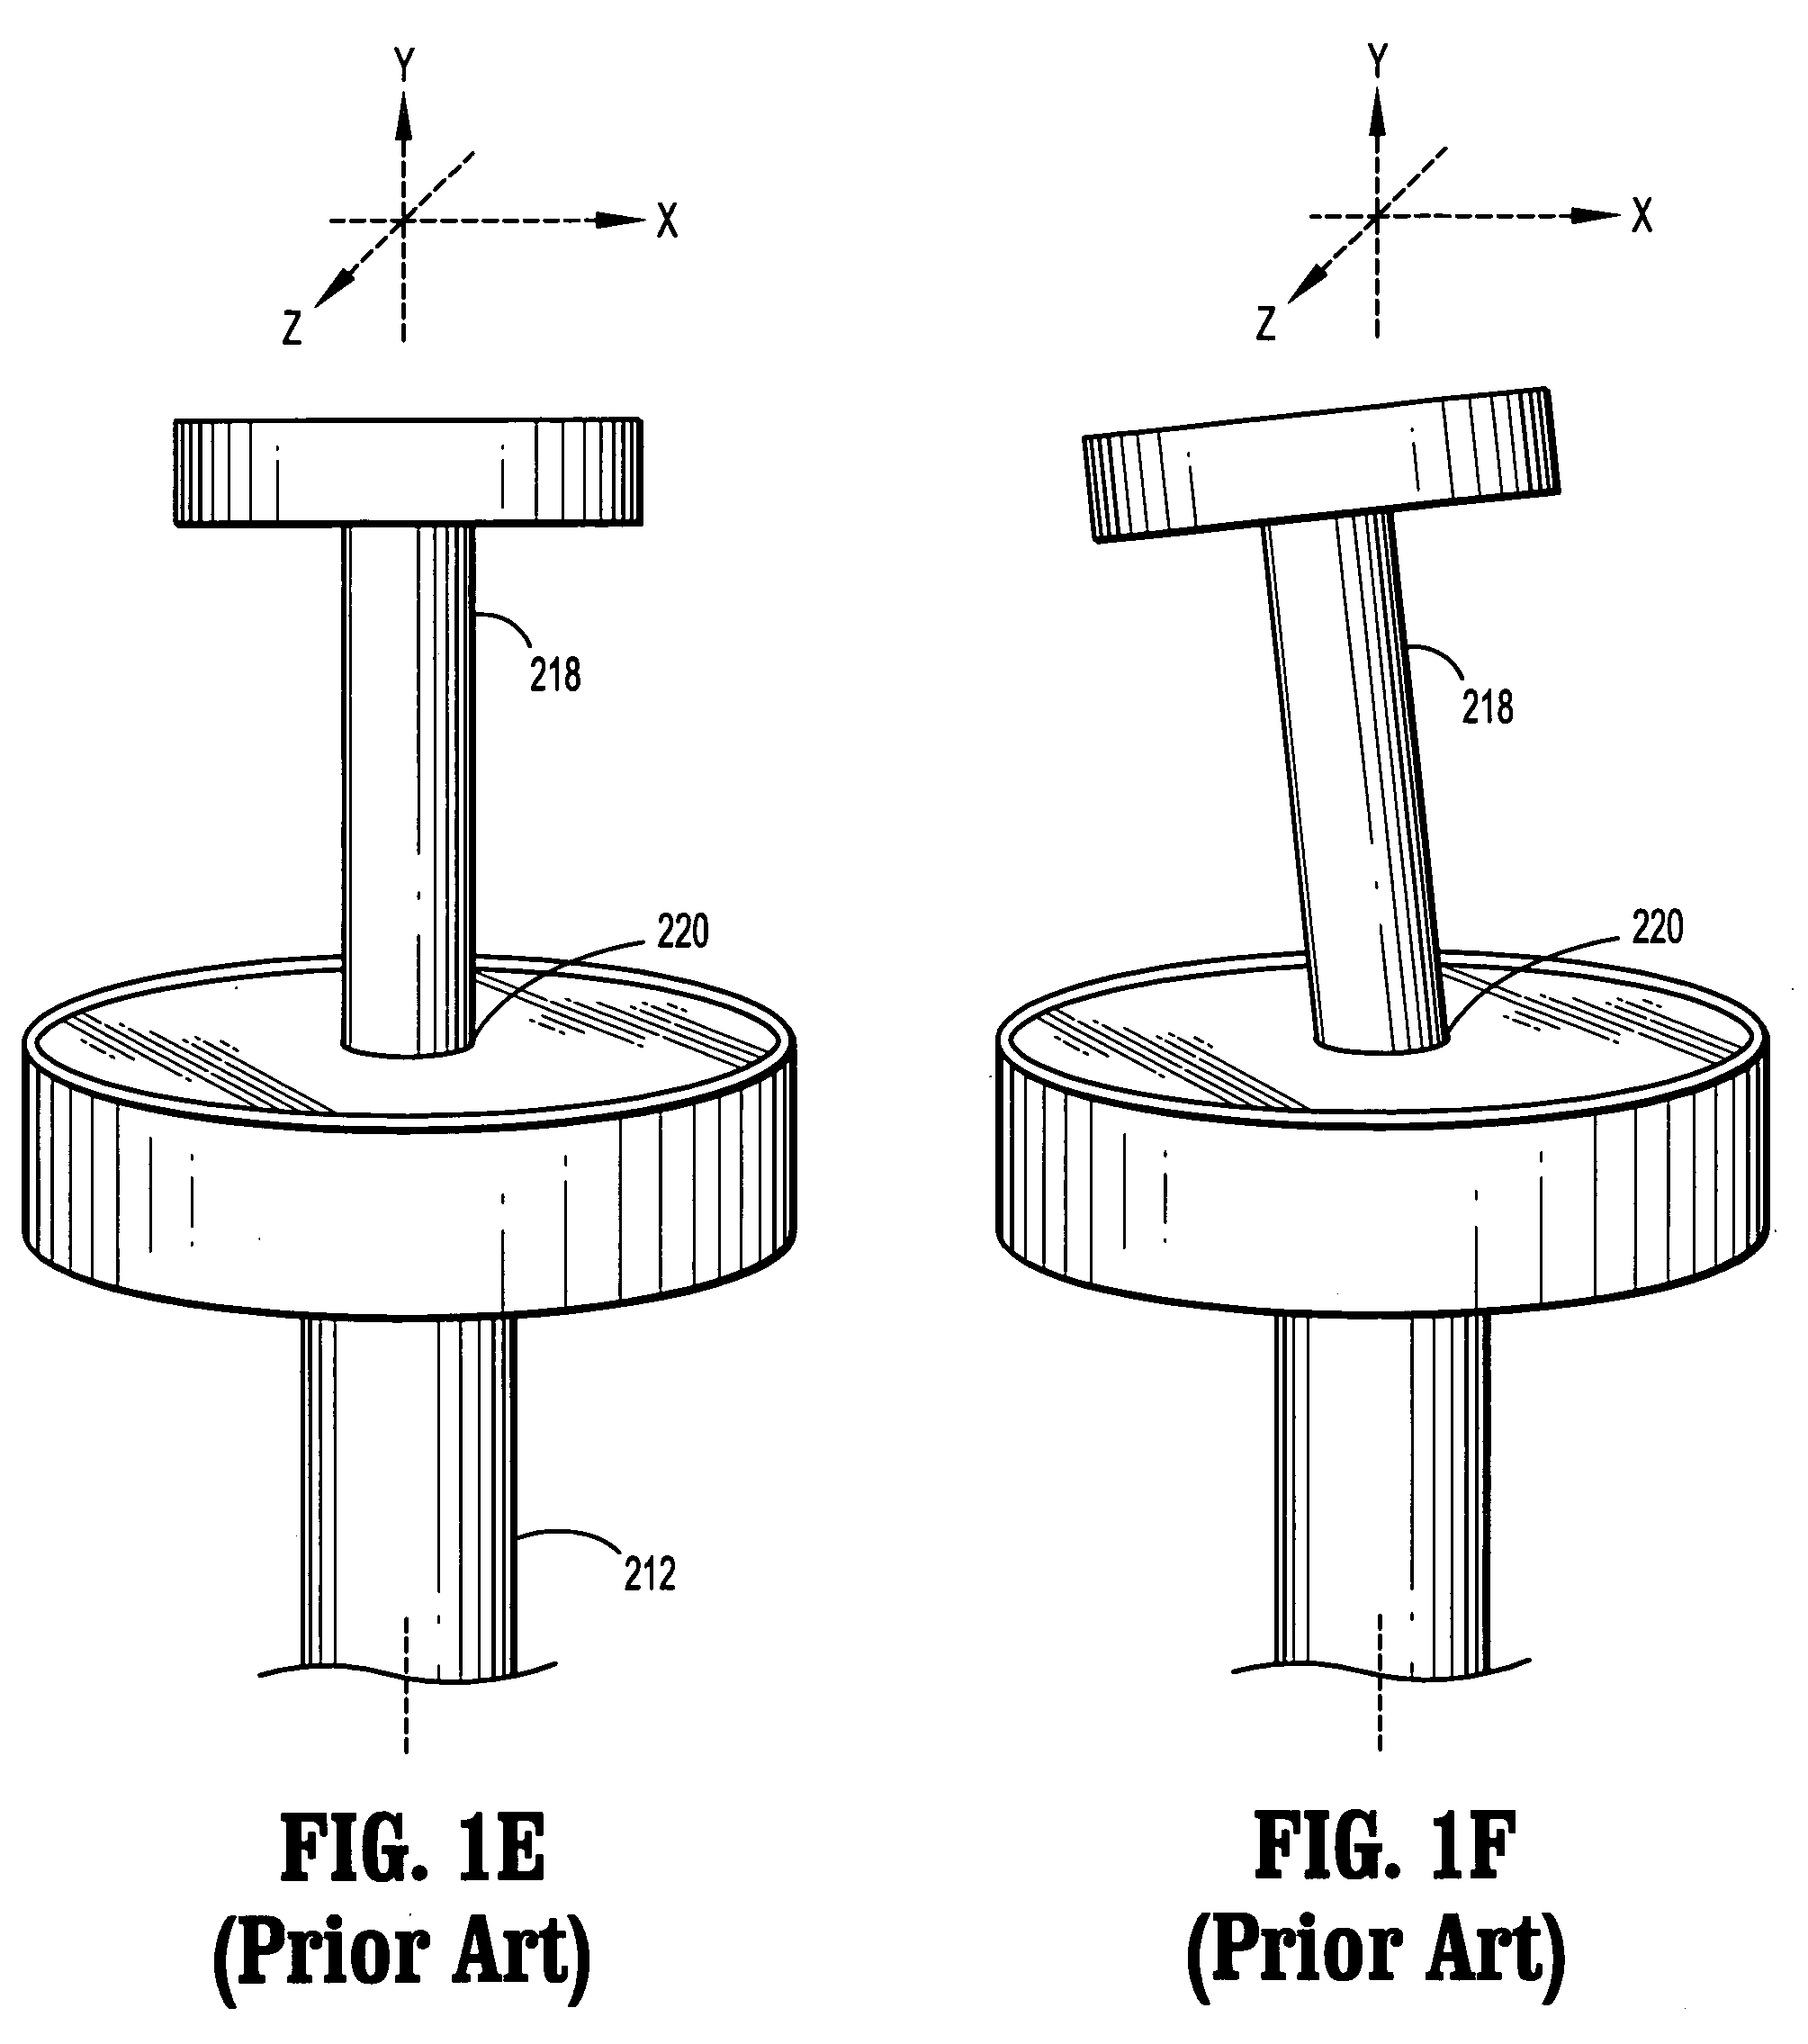 Surgical access port sealing assembly